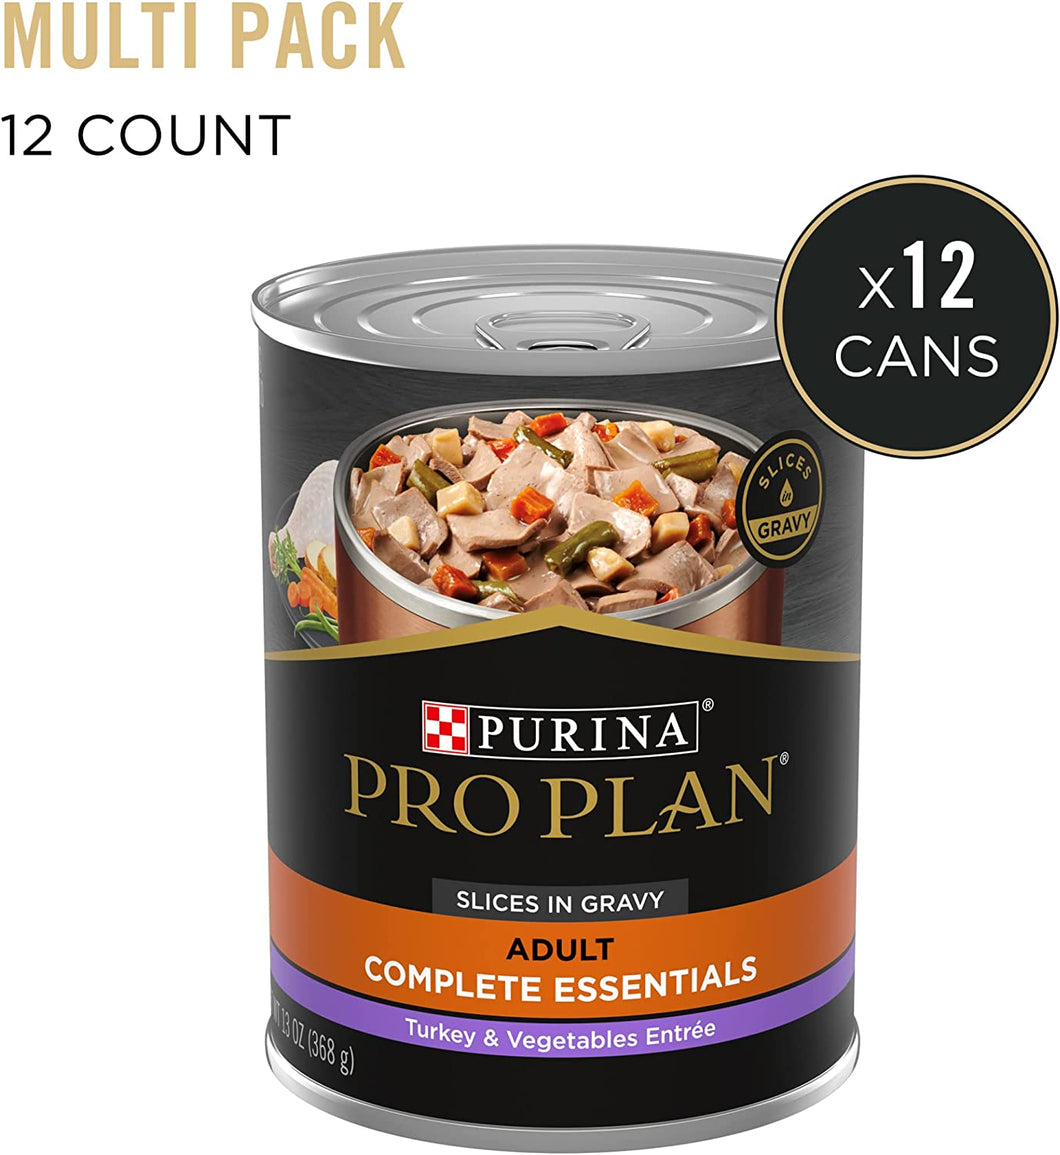 Purina Pro Plan Adult Turkey and Vegetable Entree Wet Dog Food 368 g, Pack of 12